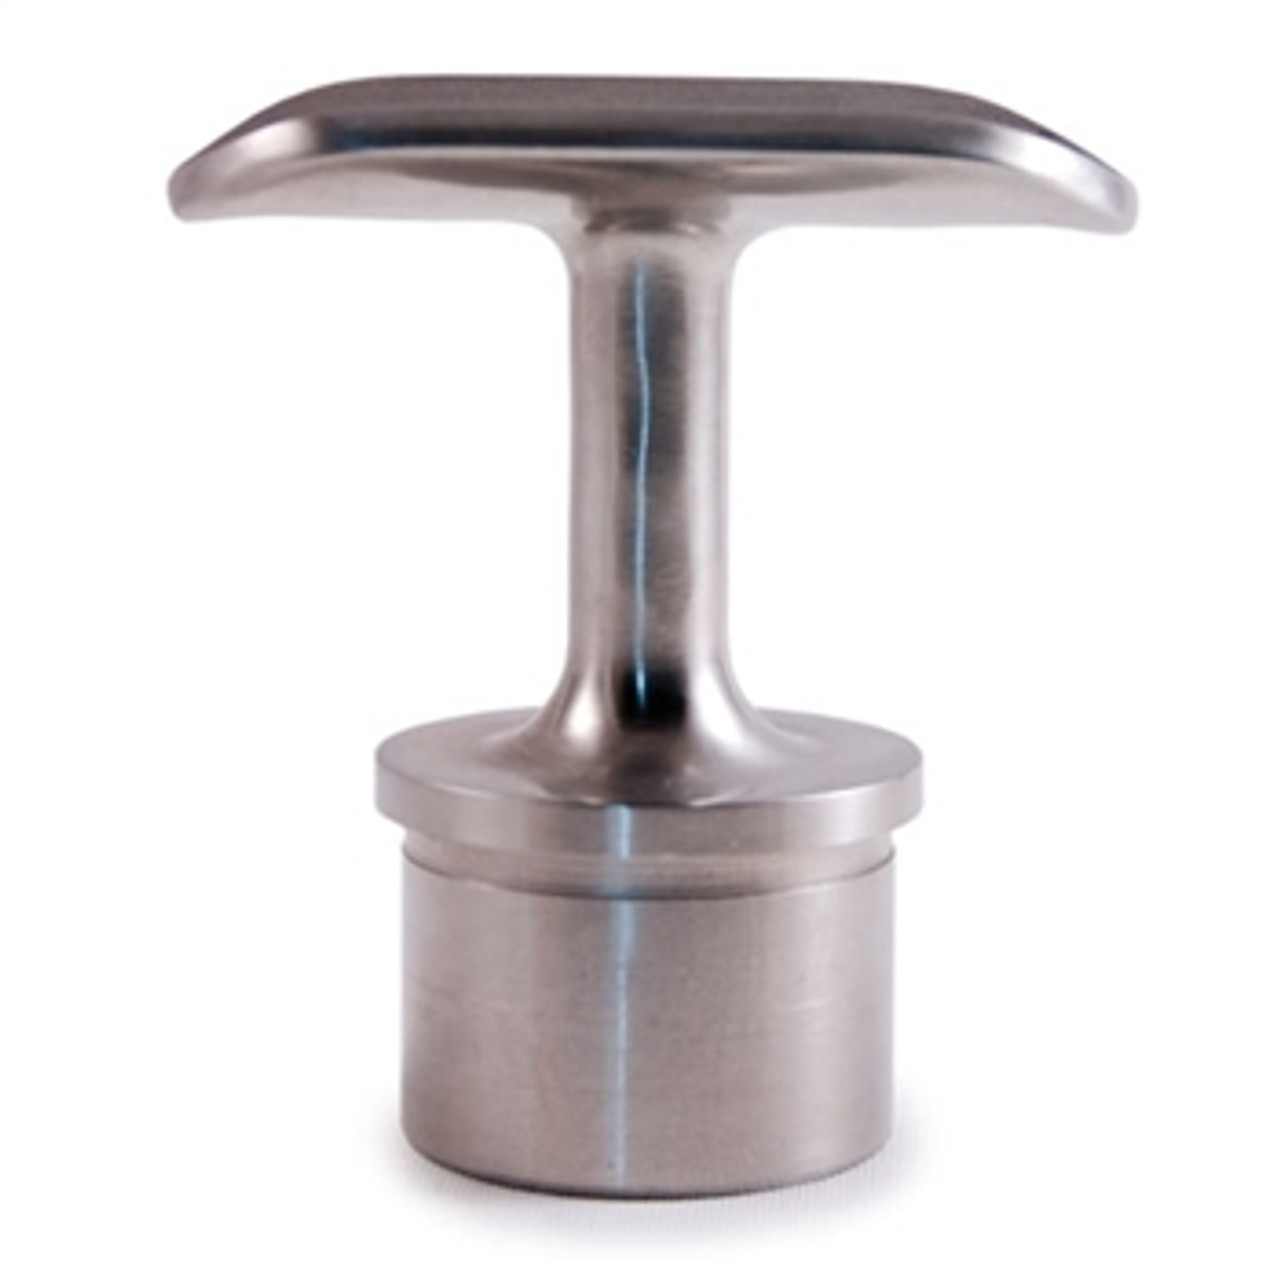 E458 Stainless Steel Handrail Support, Rigid